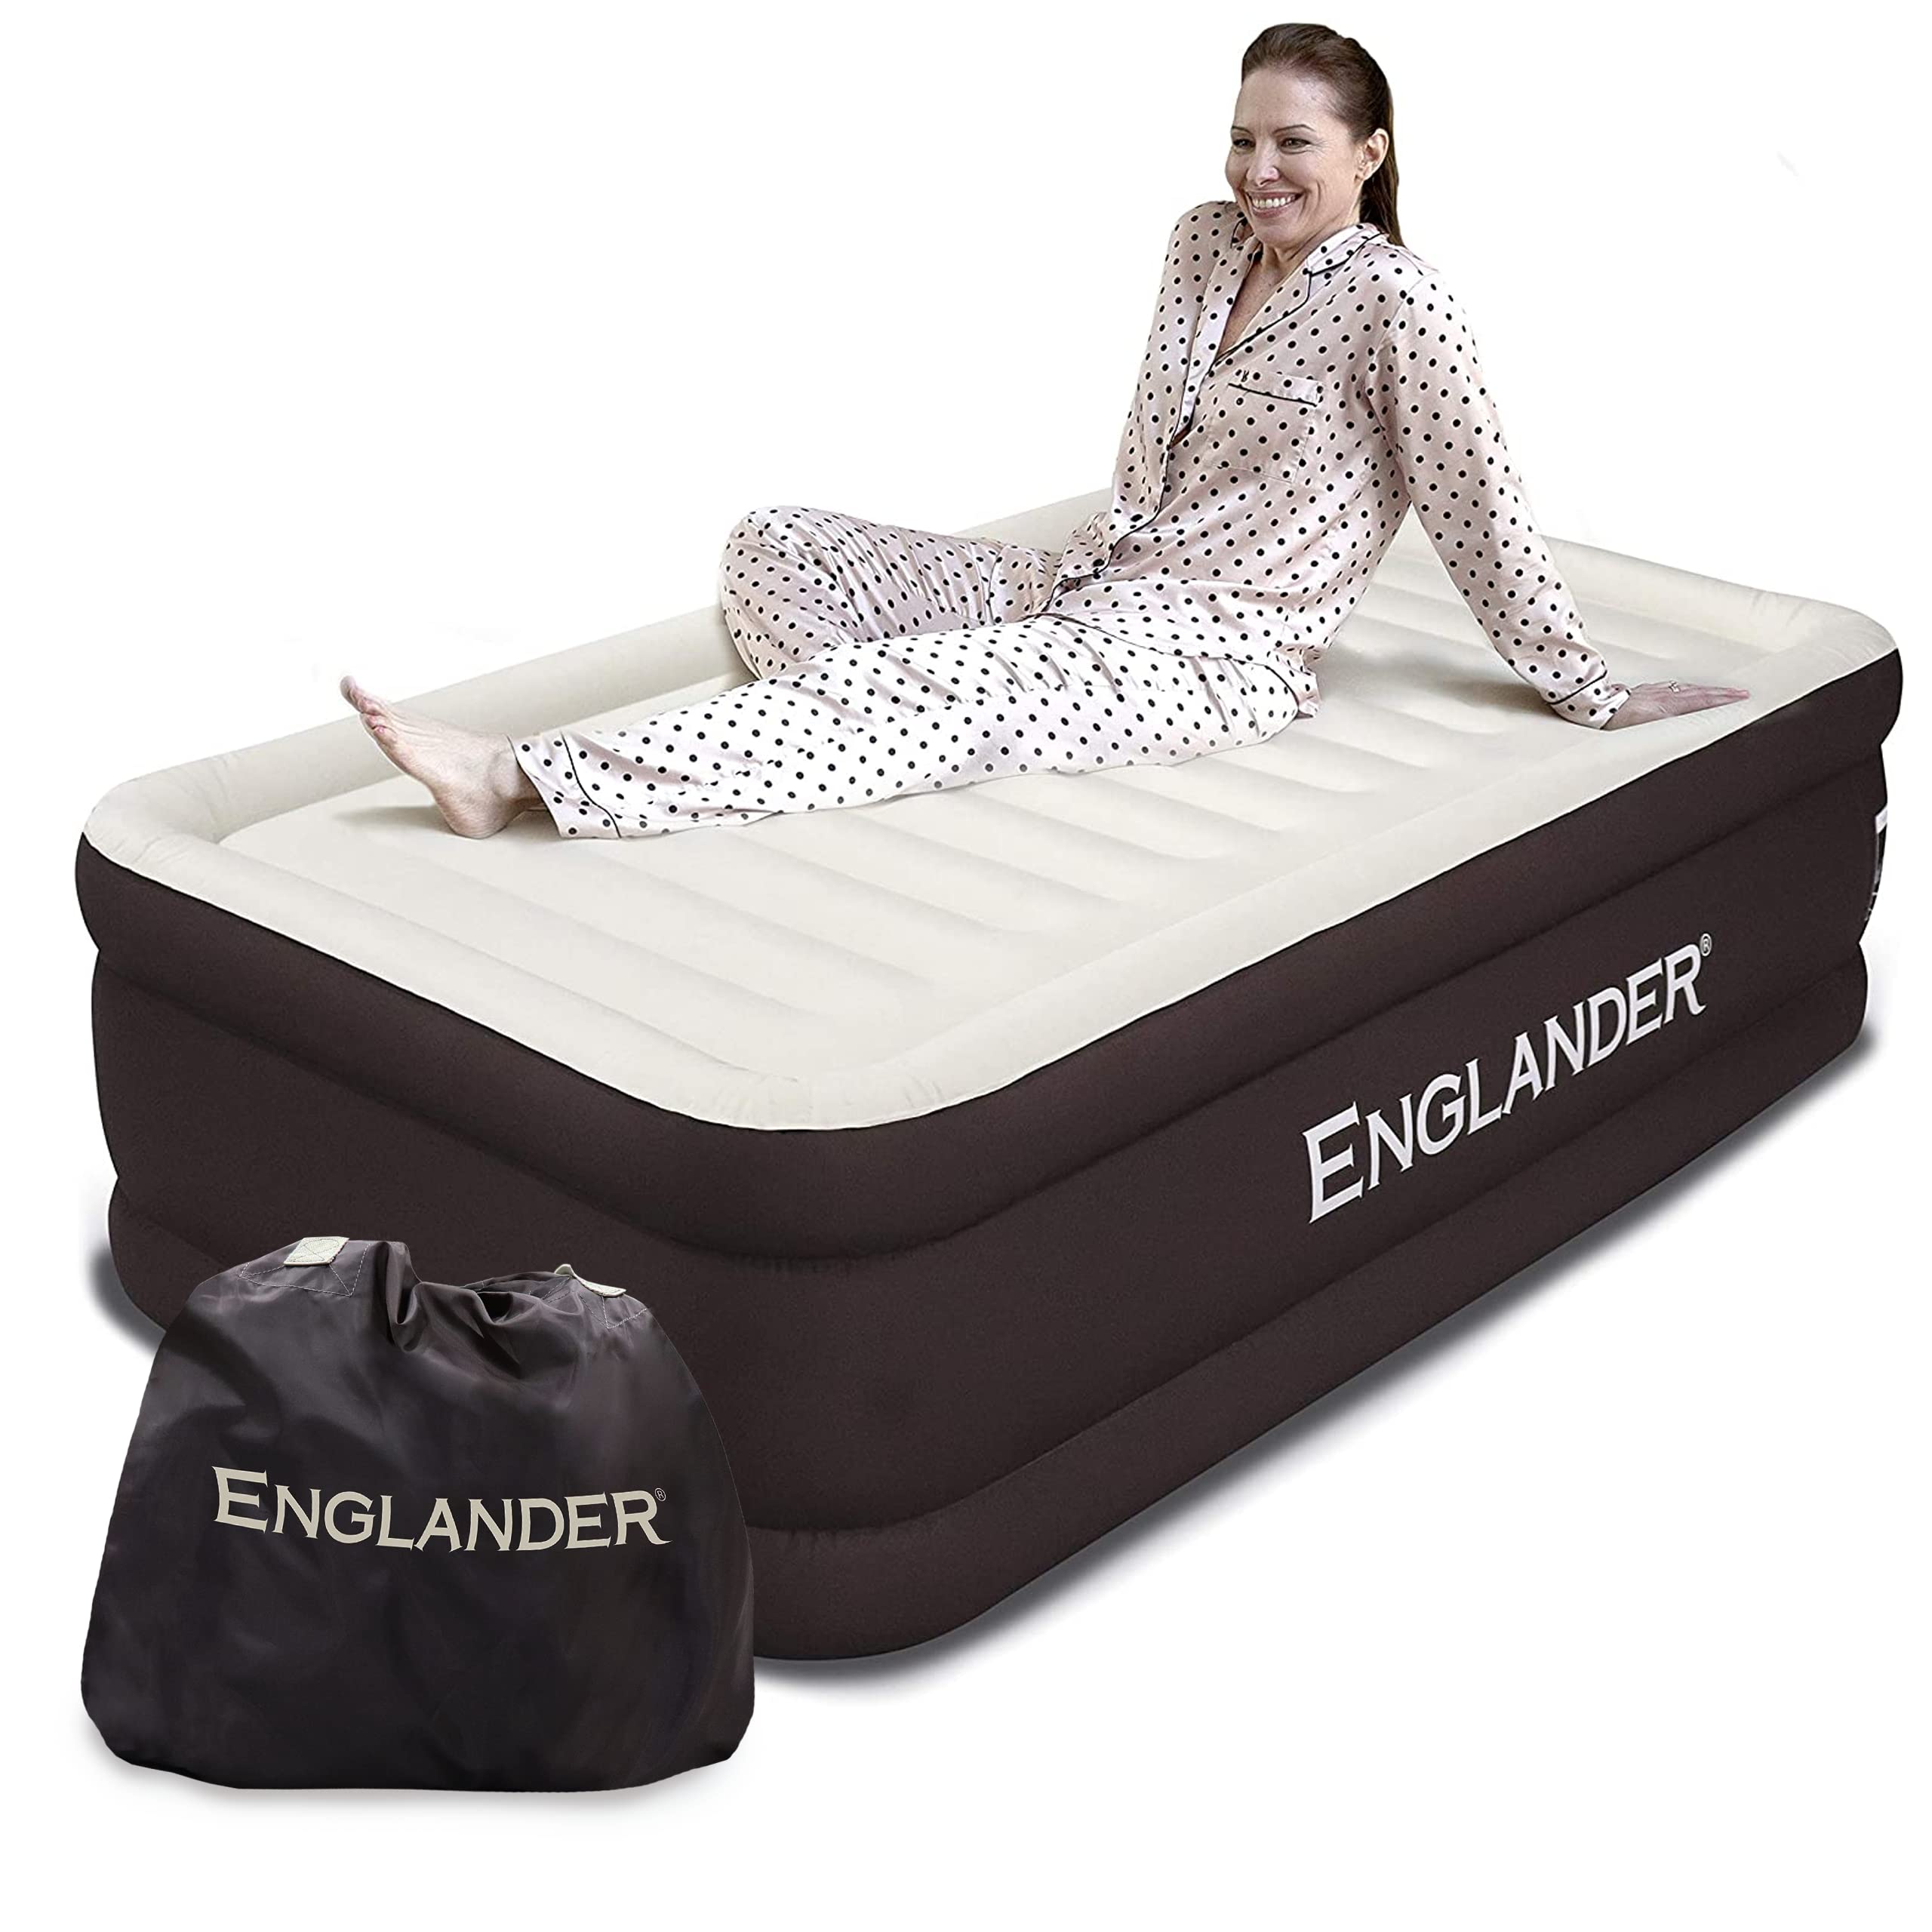 Book Cover Englander Air Mattress w/Built in Pump - Luxury Double High Inflatable Bed for Home, Travel & Camping - Premium Blow Up Bed for Kids & Adults Brown California King